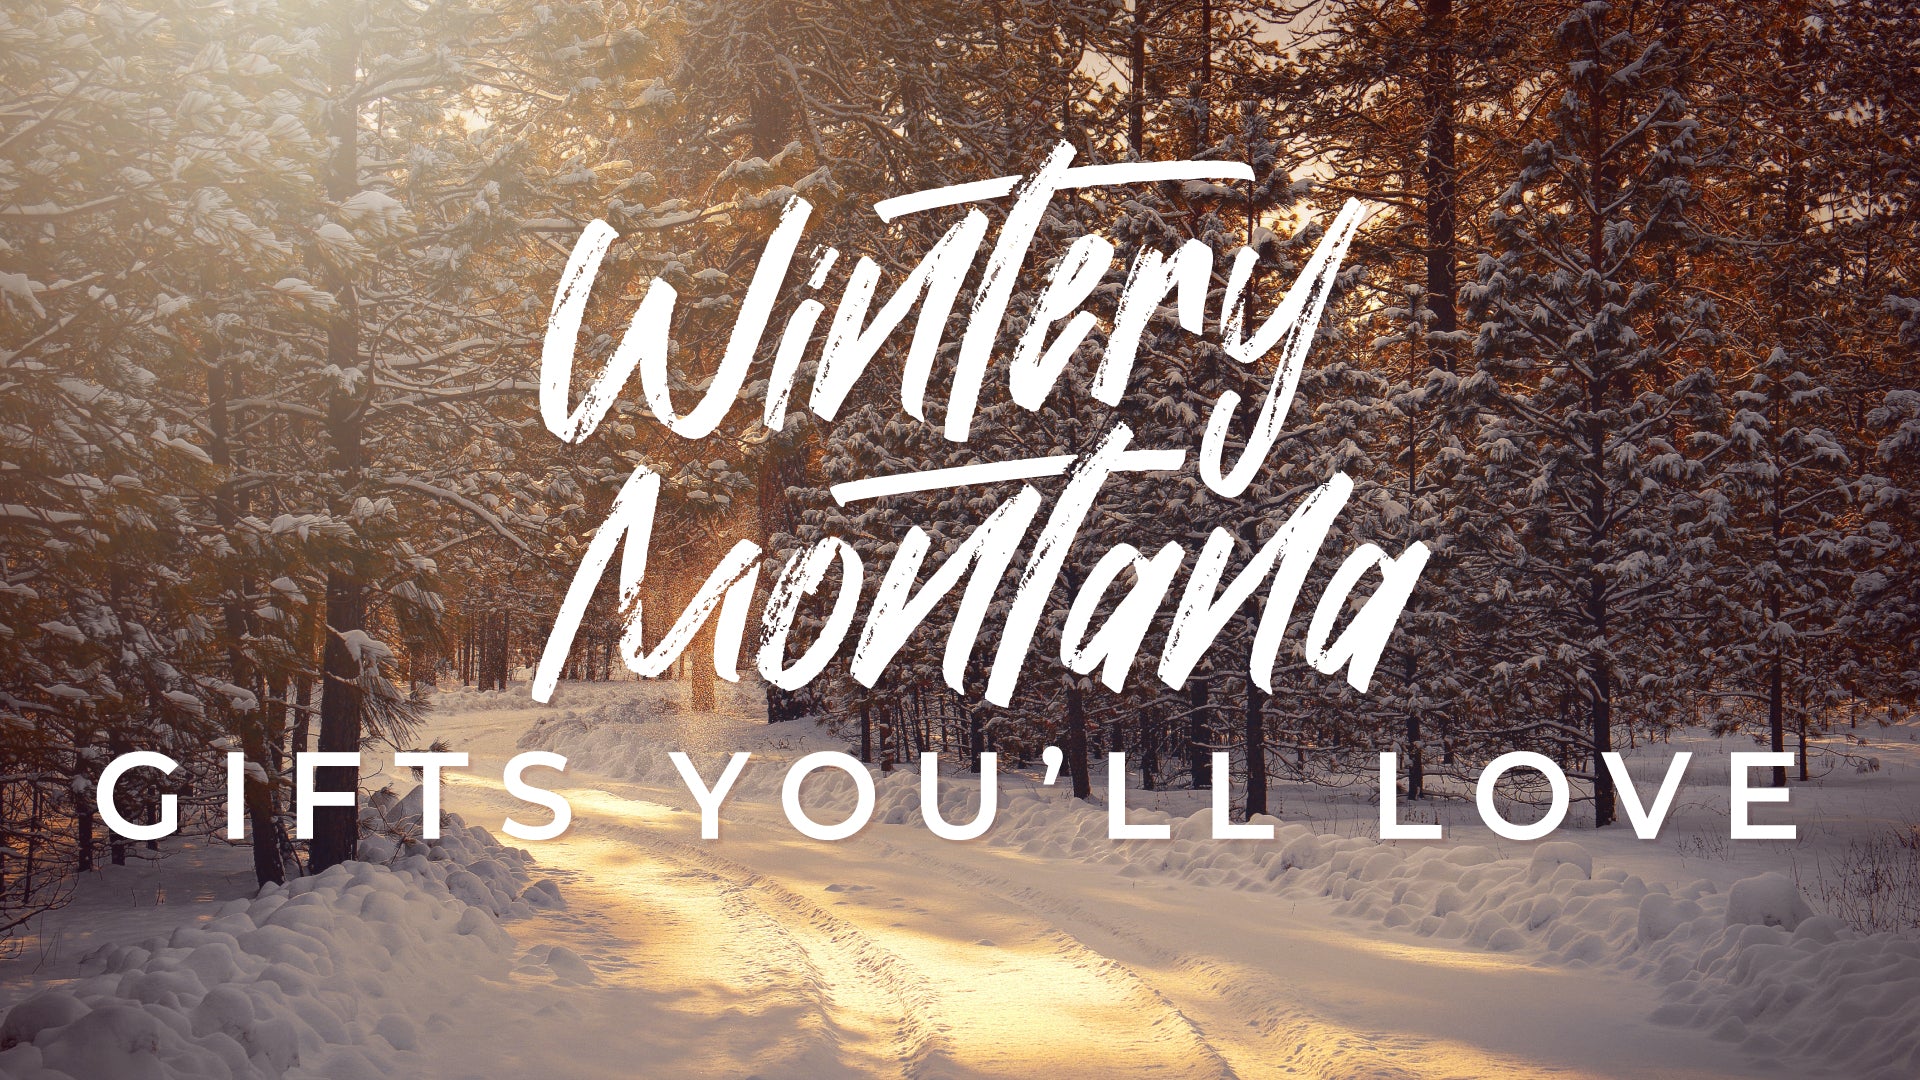 Wintery Gifts You'll Love from Montana Gift Corral